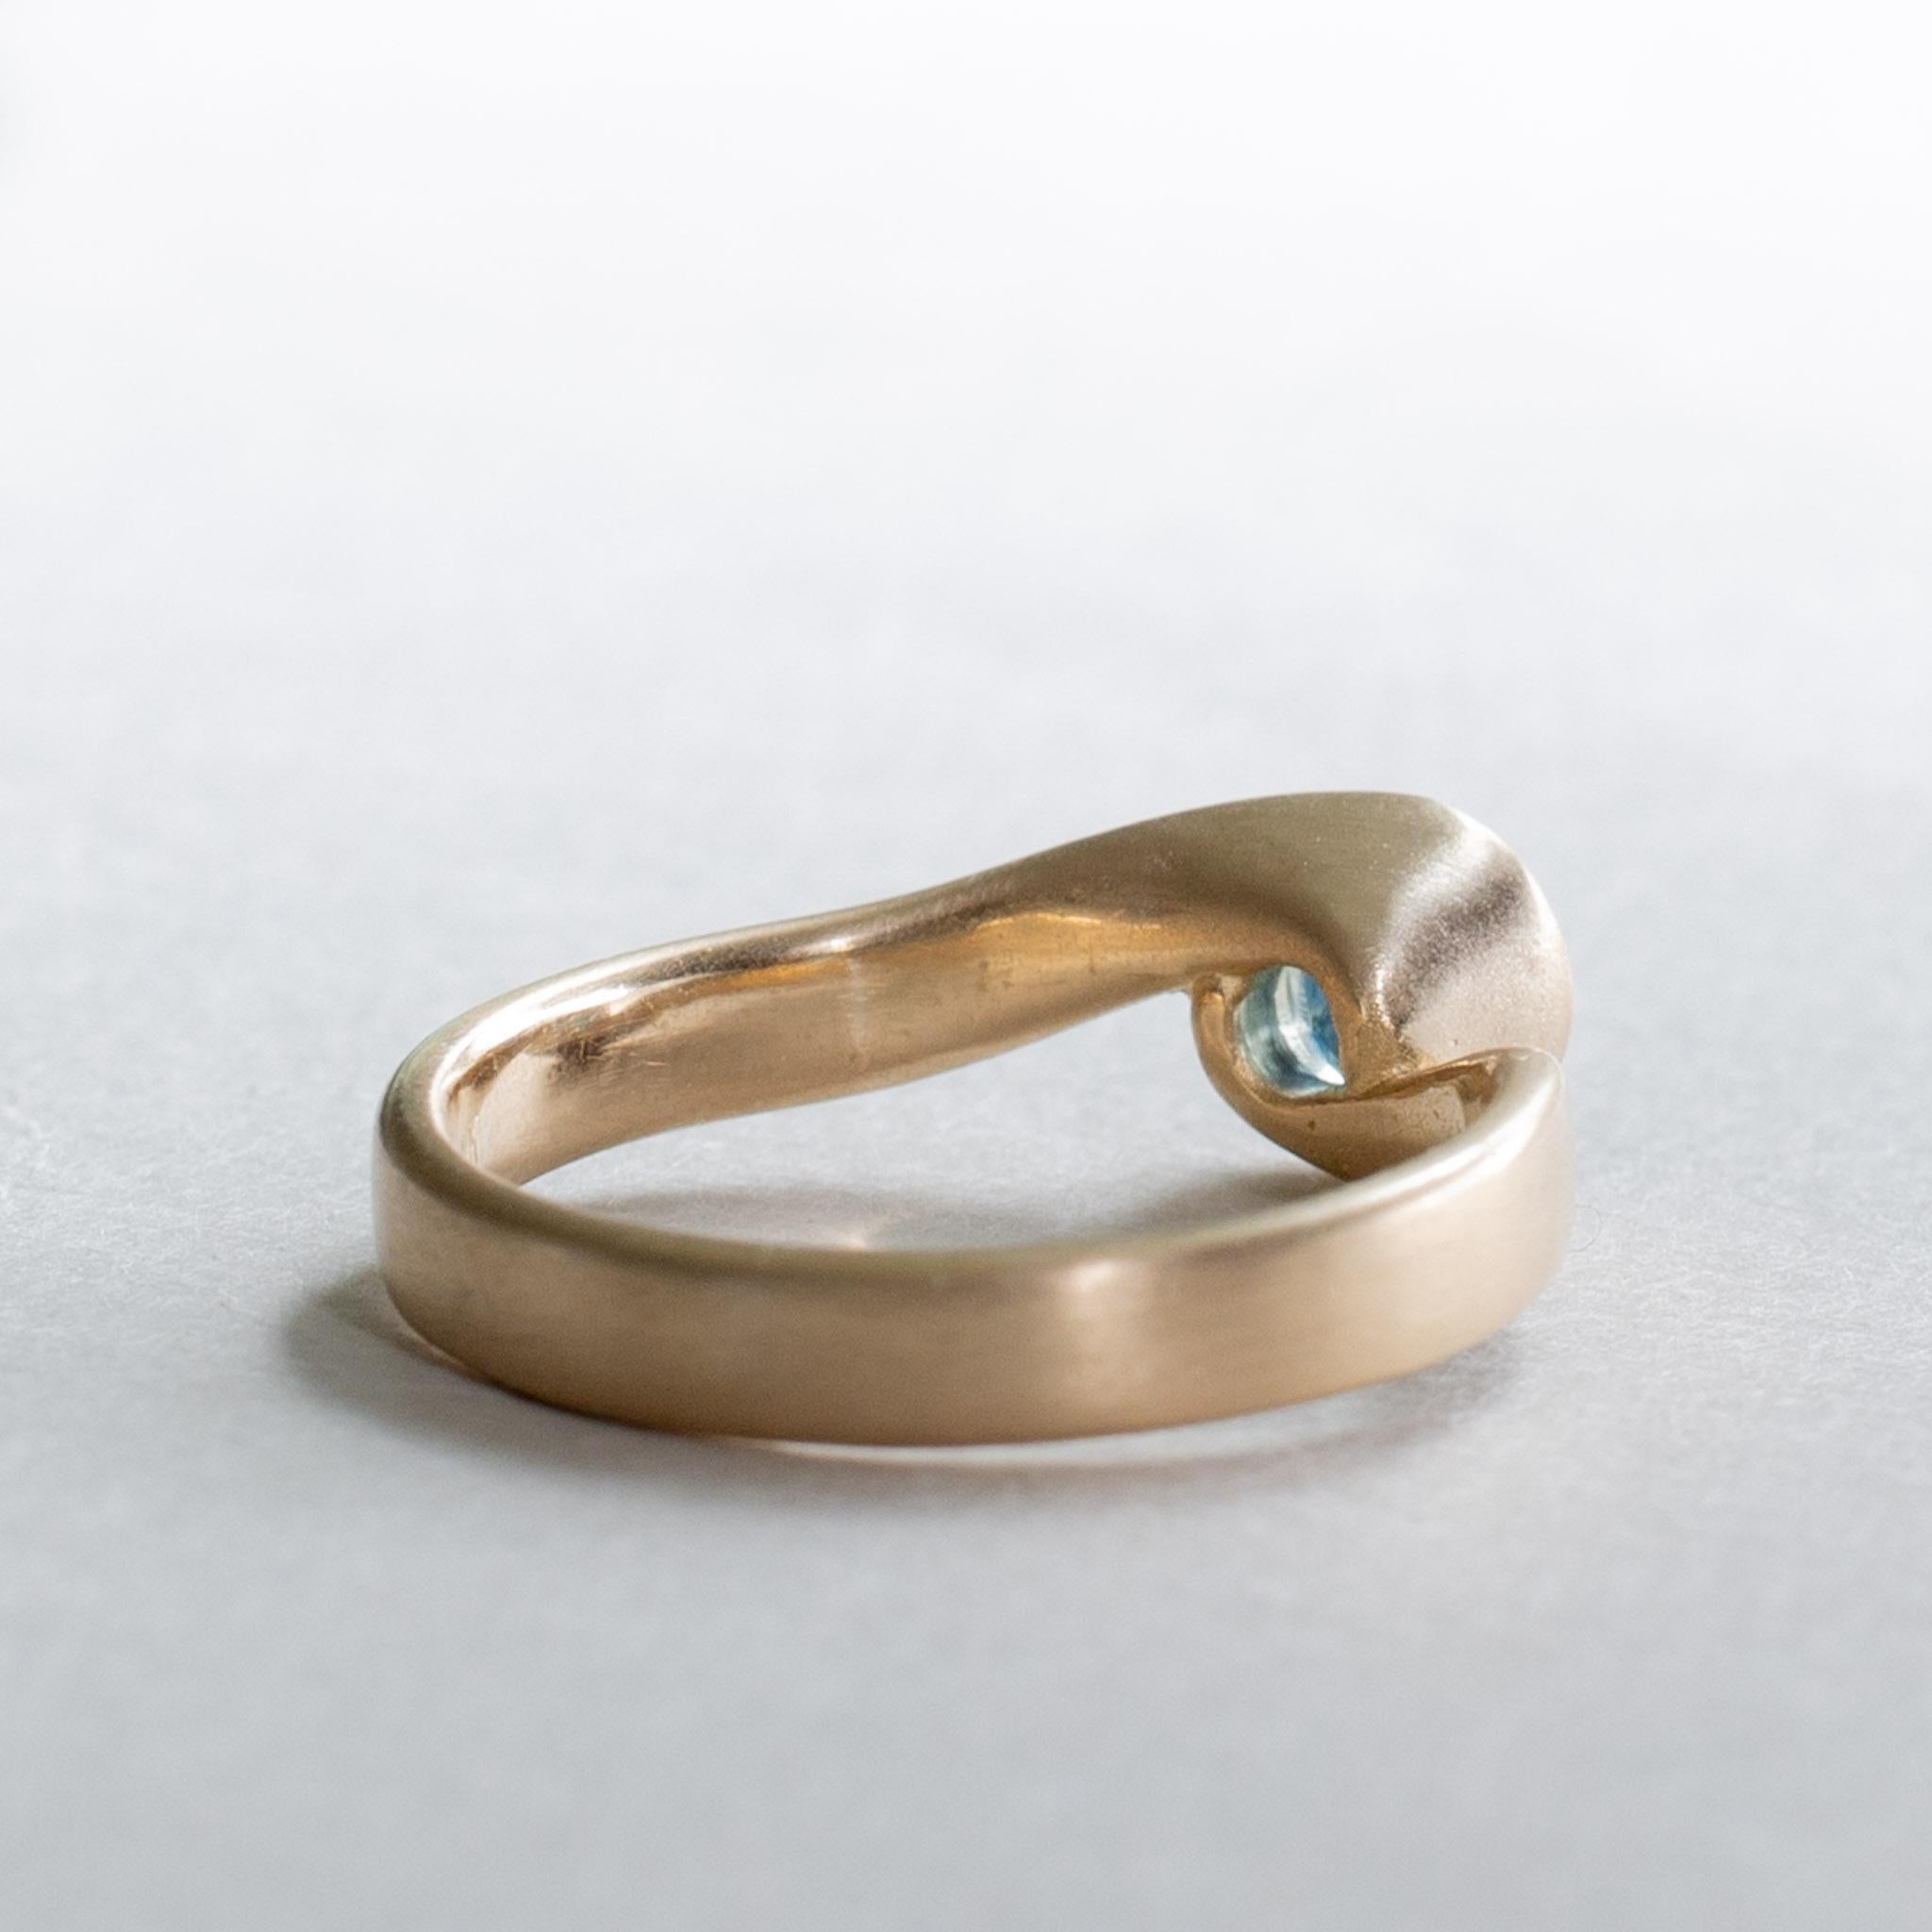 Contemporary Teal Sapphire Ring, 14 Karat Yellow Gold Sapphire Ring